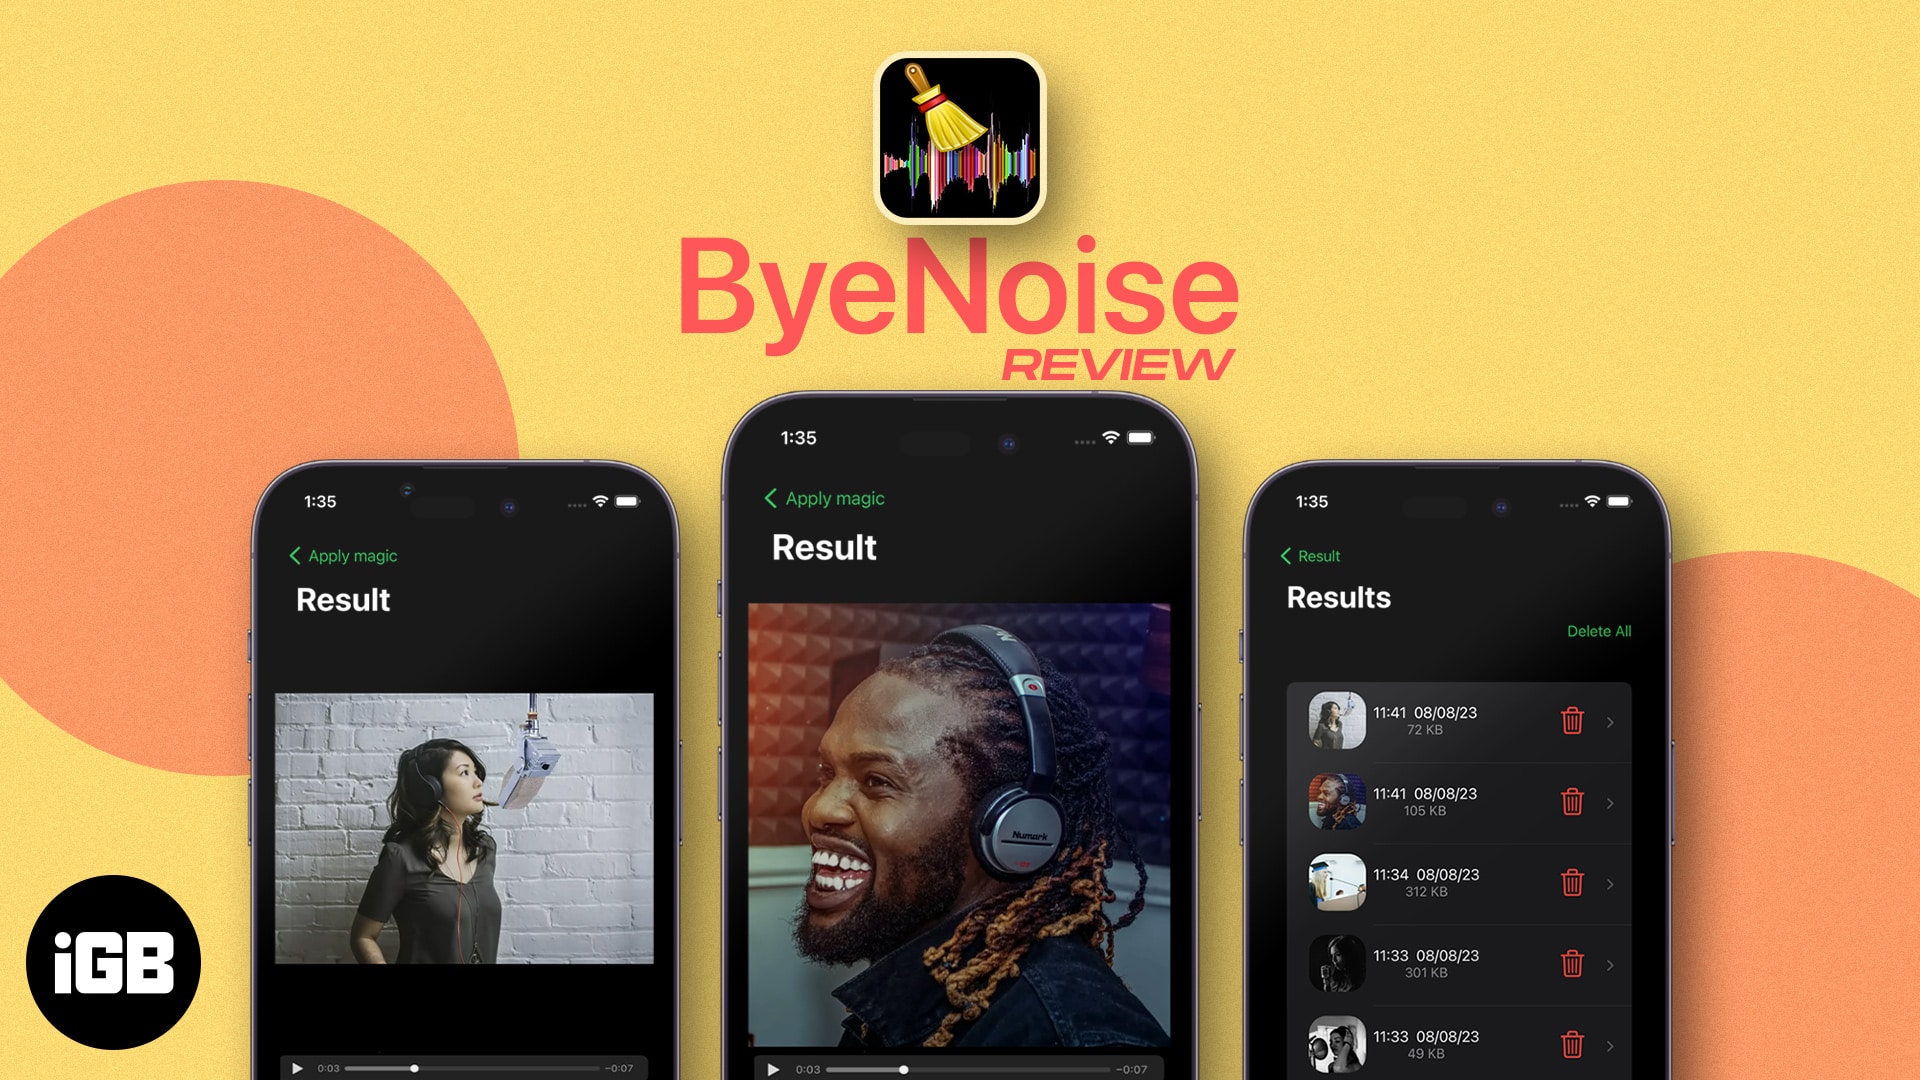 Remove background noise from iphone videos with byenoise